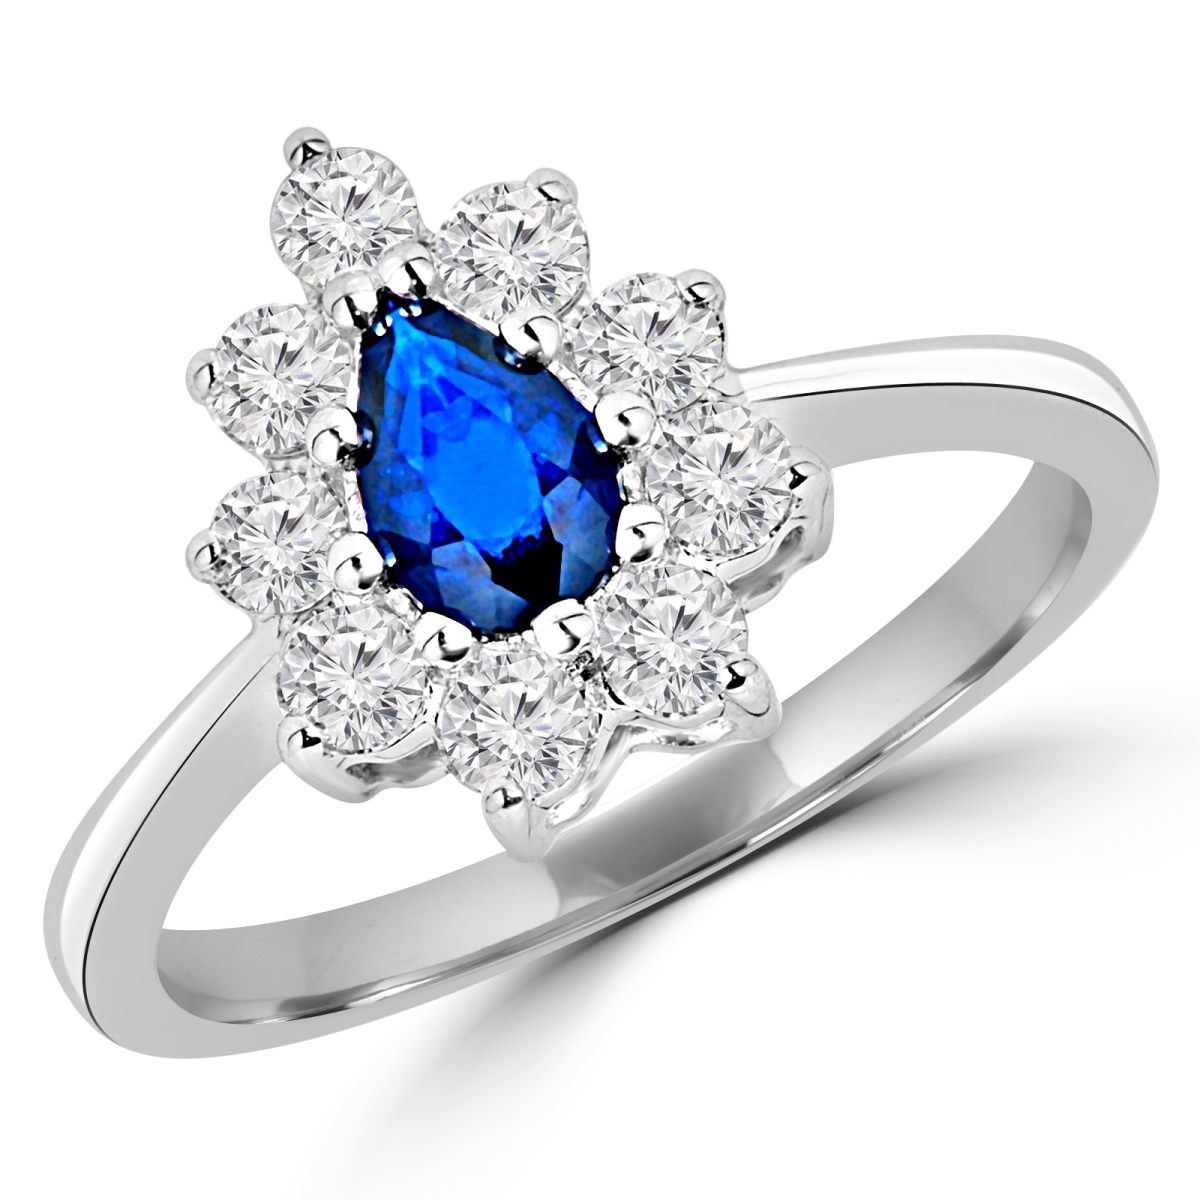 Picture of Majesty Diamonds MD180236-8.75 1 CTW Pear Blue Sapphire Halo Cocktail Ring in 14K White Gold - Size 8.75